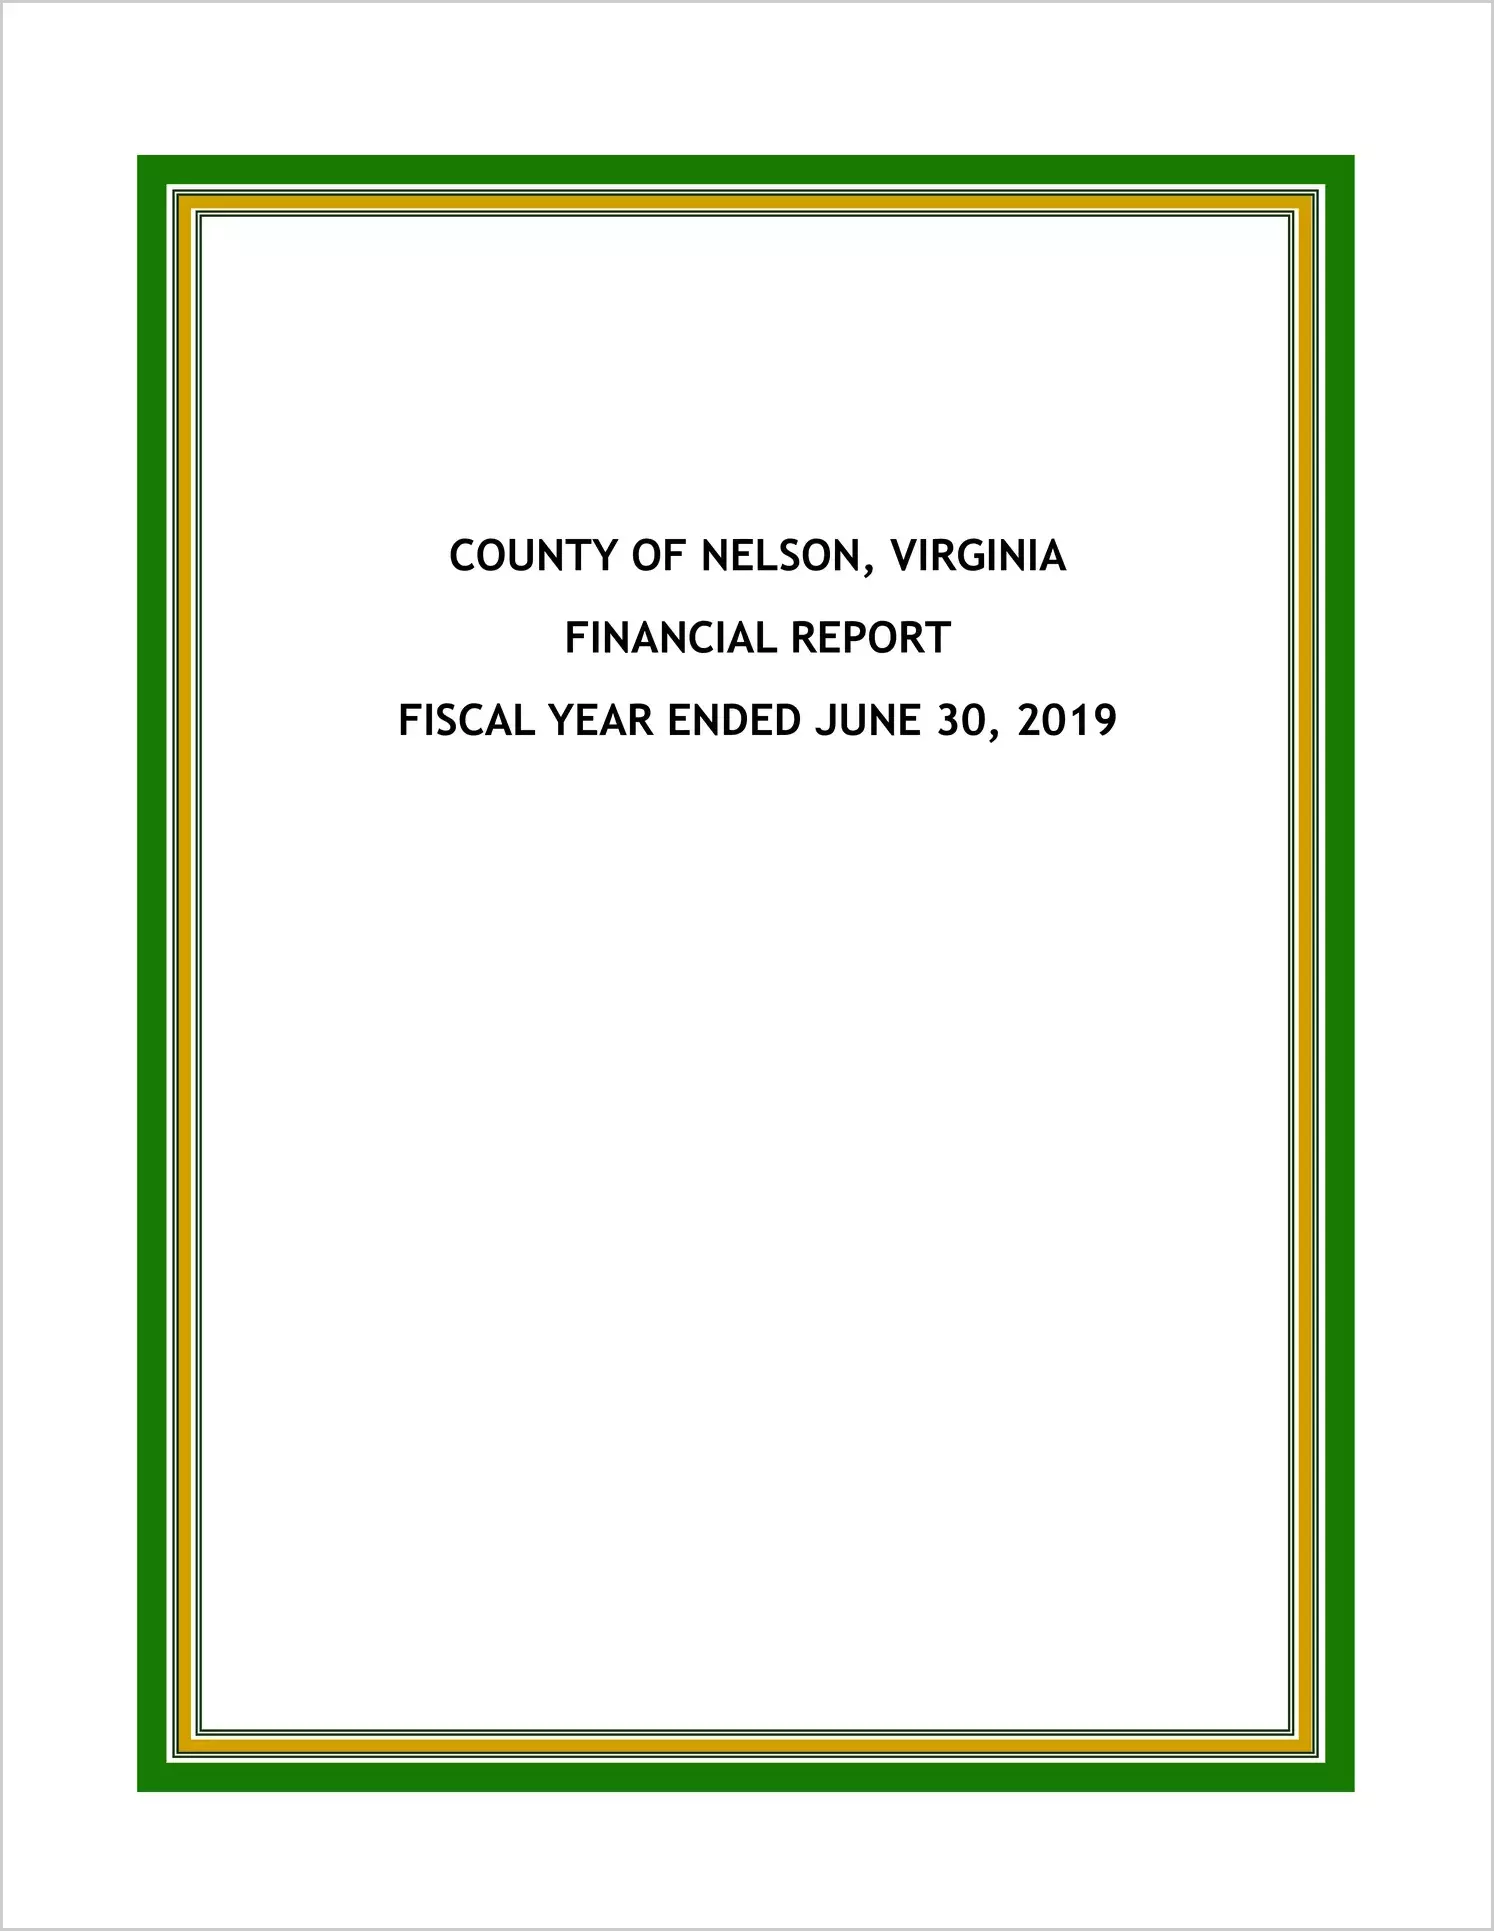 2019 Annual Financial Report for County of Nelson